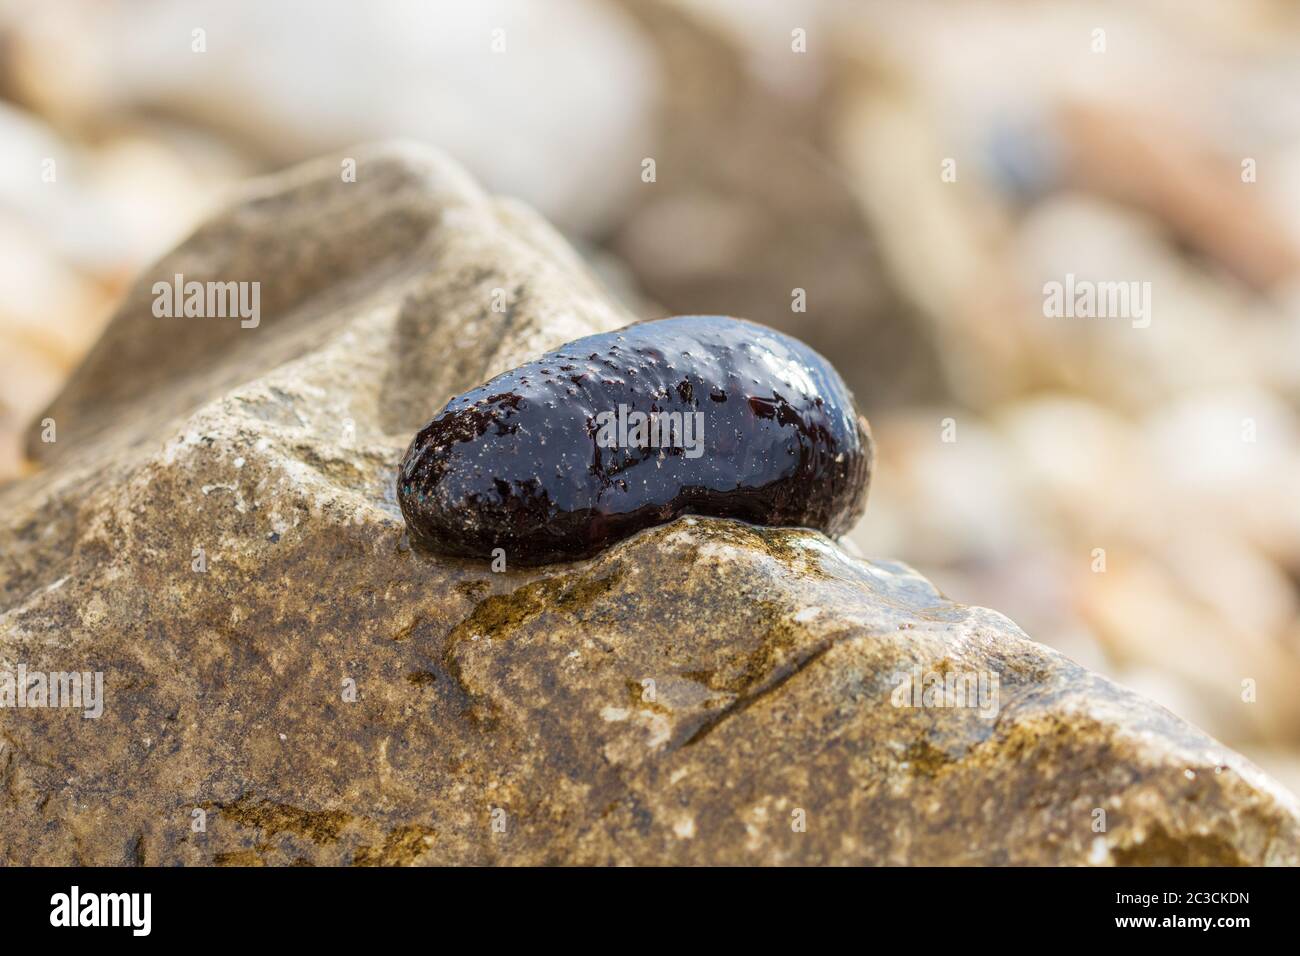 Close up of sea cucumber on a stone on the beach. Stock Photo